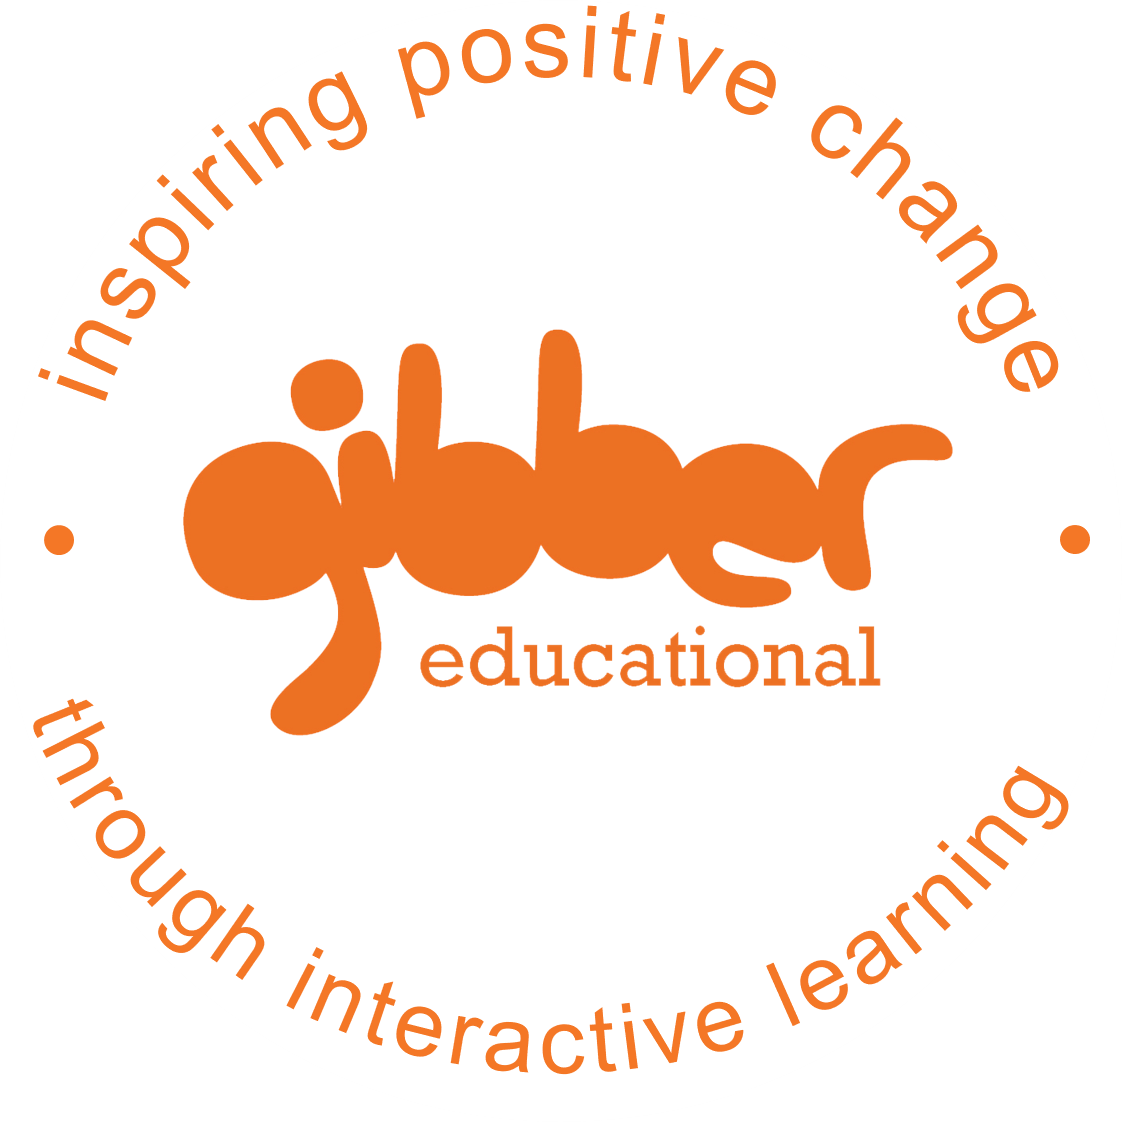 Gibber - inspiring positive change through interactive learning